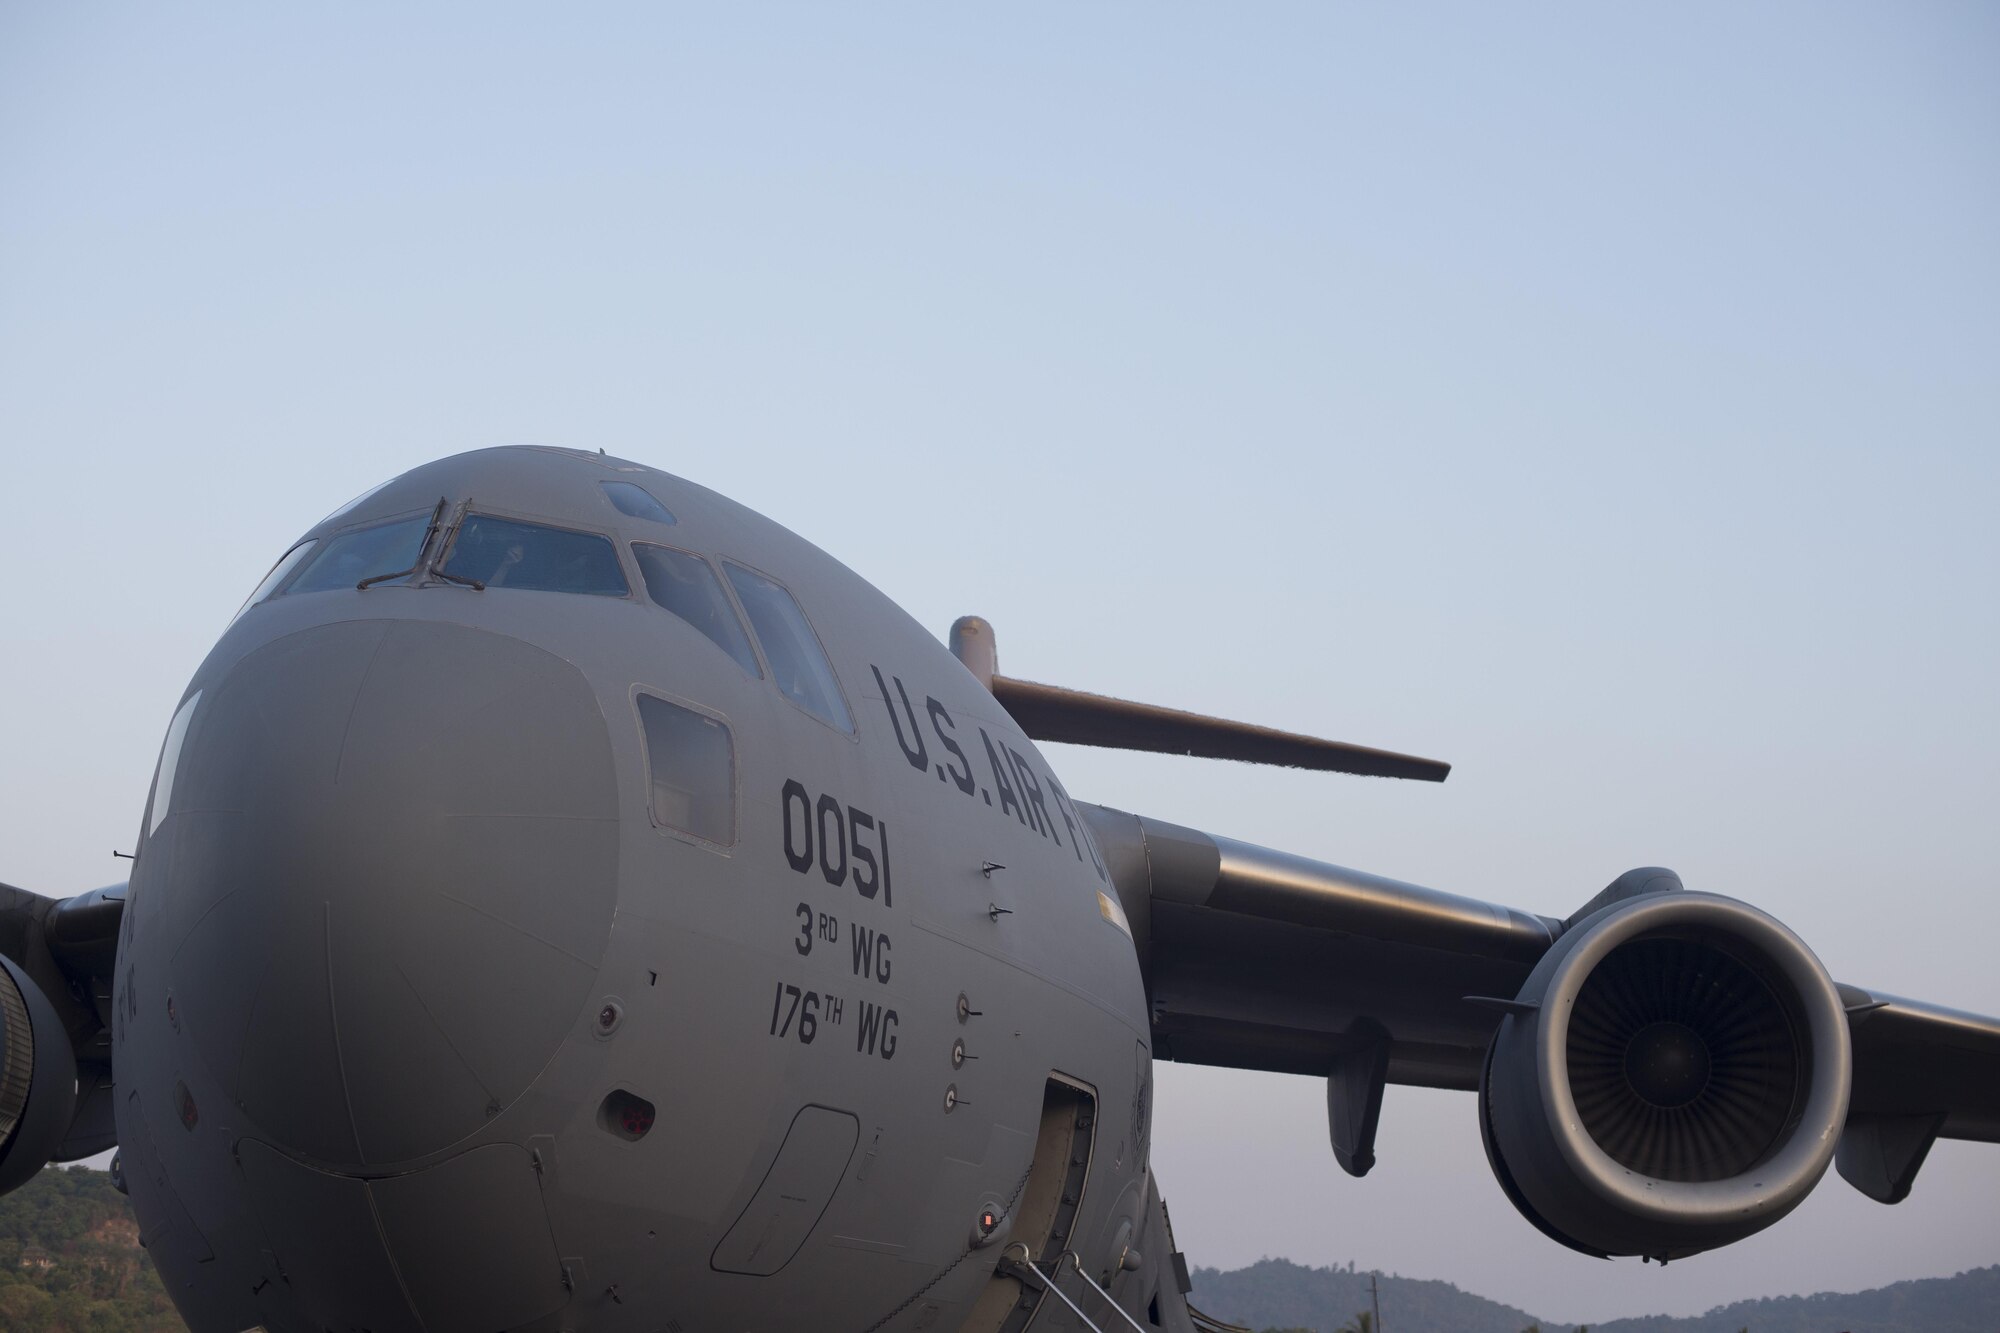 A C-17 Globemaster III parks on the runway of the Langkawi International Airport after transporting a UH-1Y Huey from Marine Corps Station Hawaii to support the Langkawi International Maritime and Aerospace Exhibition March 16, 2015, in Langkawi, Malaysia. Defense Department participation in the LIMA 15 airshow strengthens military-to-military relationships and underscores the cooperation agreements between the U.S. and Malaysia. (U.S. Air Force photo/1st Lt. Elias Zani)